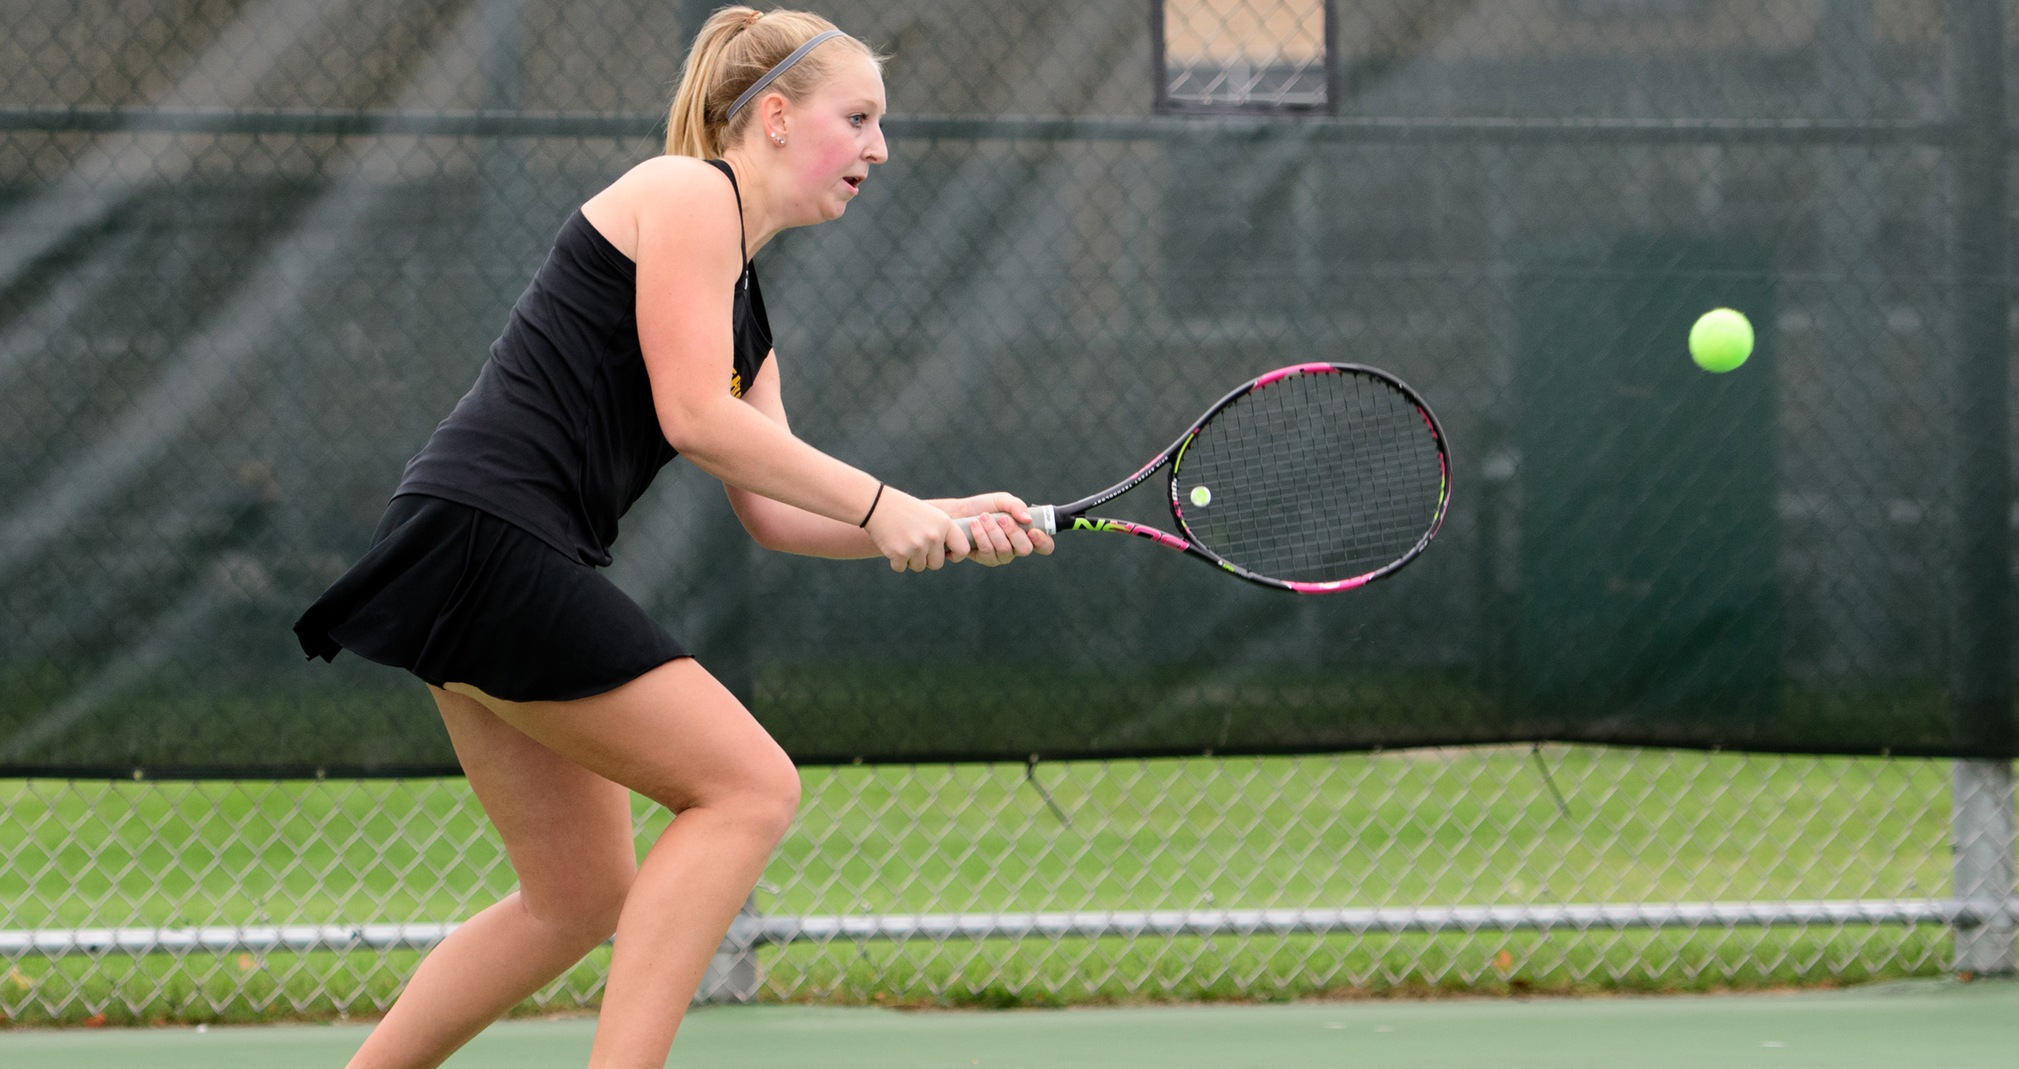 Bailey Sagen finished fourth at both No 1 singles and No. 1 doubles at this year's WIAC Championship.